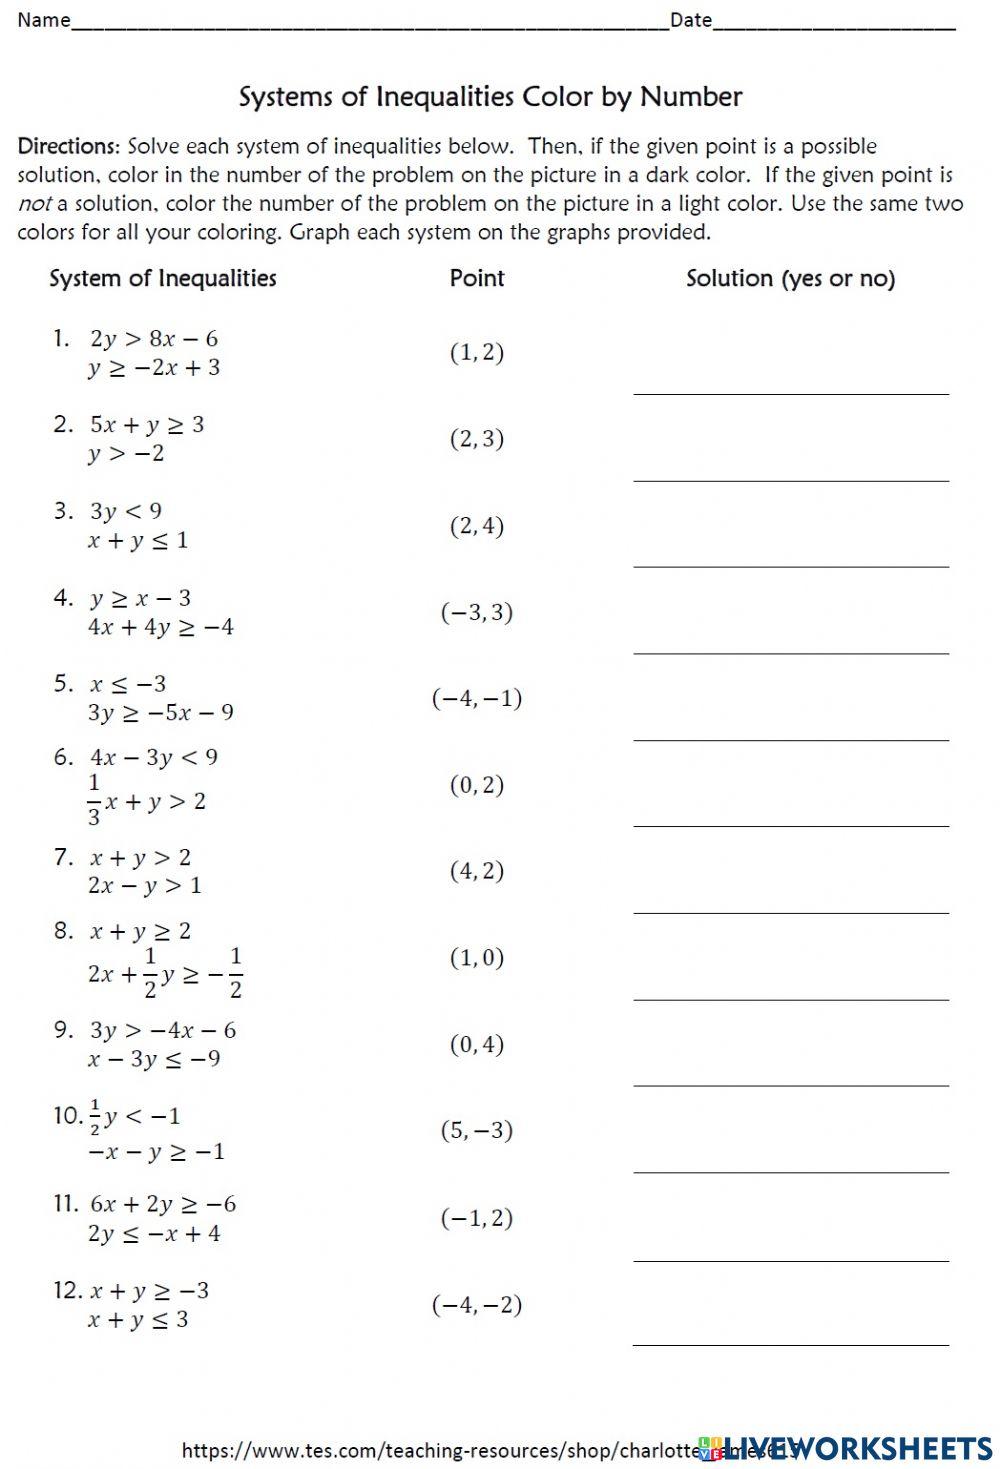 Systems of inequalities